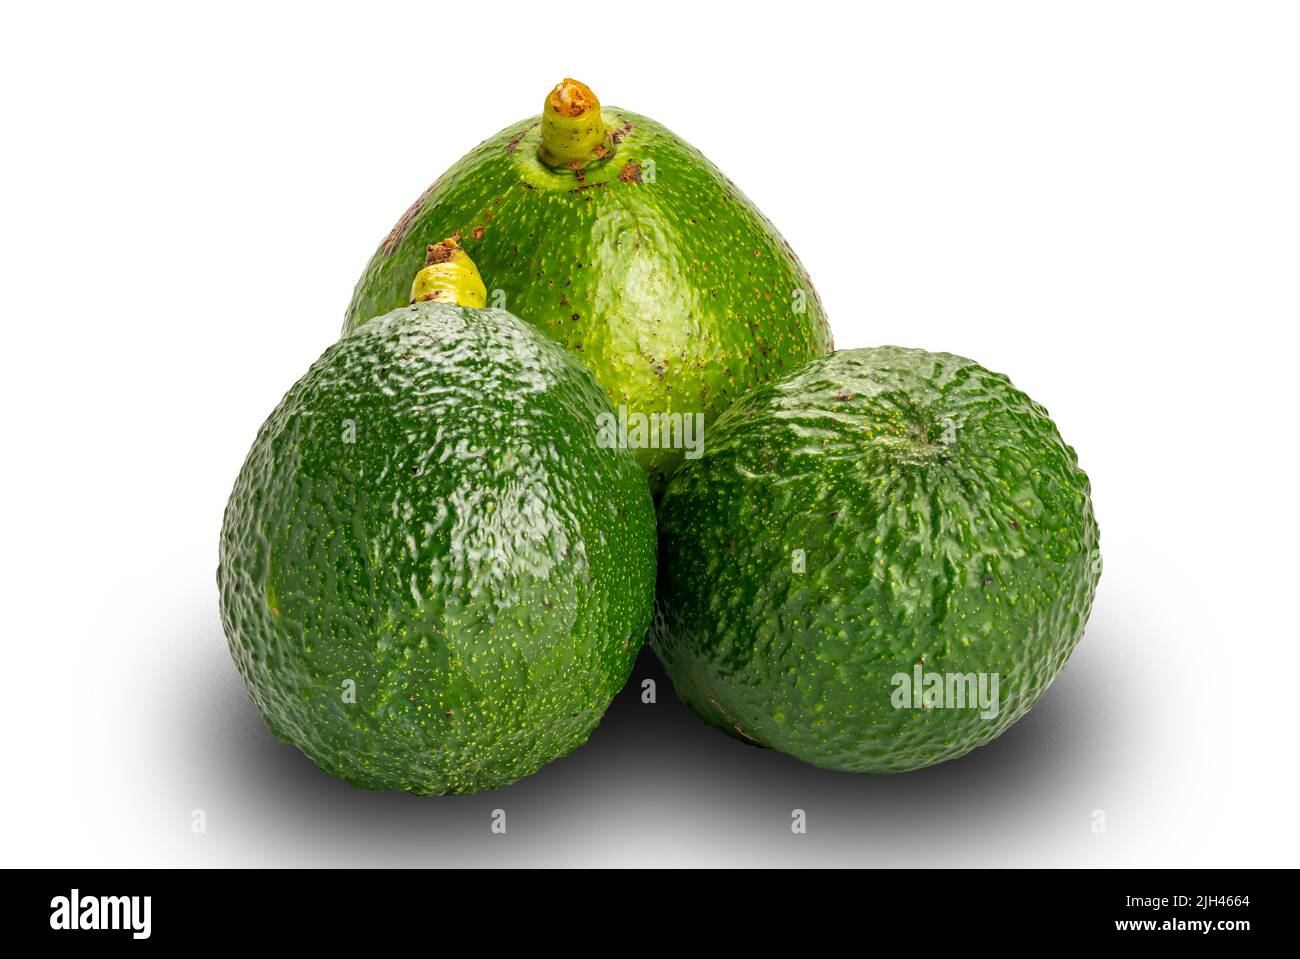 Group of fresh green avocadoes with stalk isolated on white background with clipping path. Stock Photo